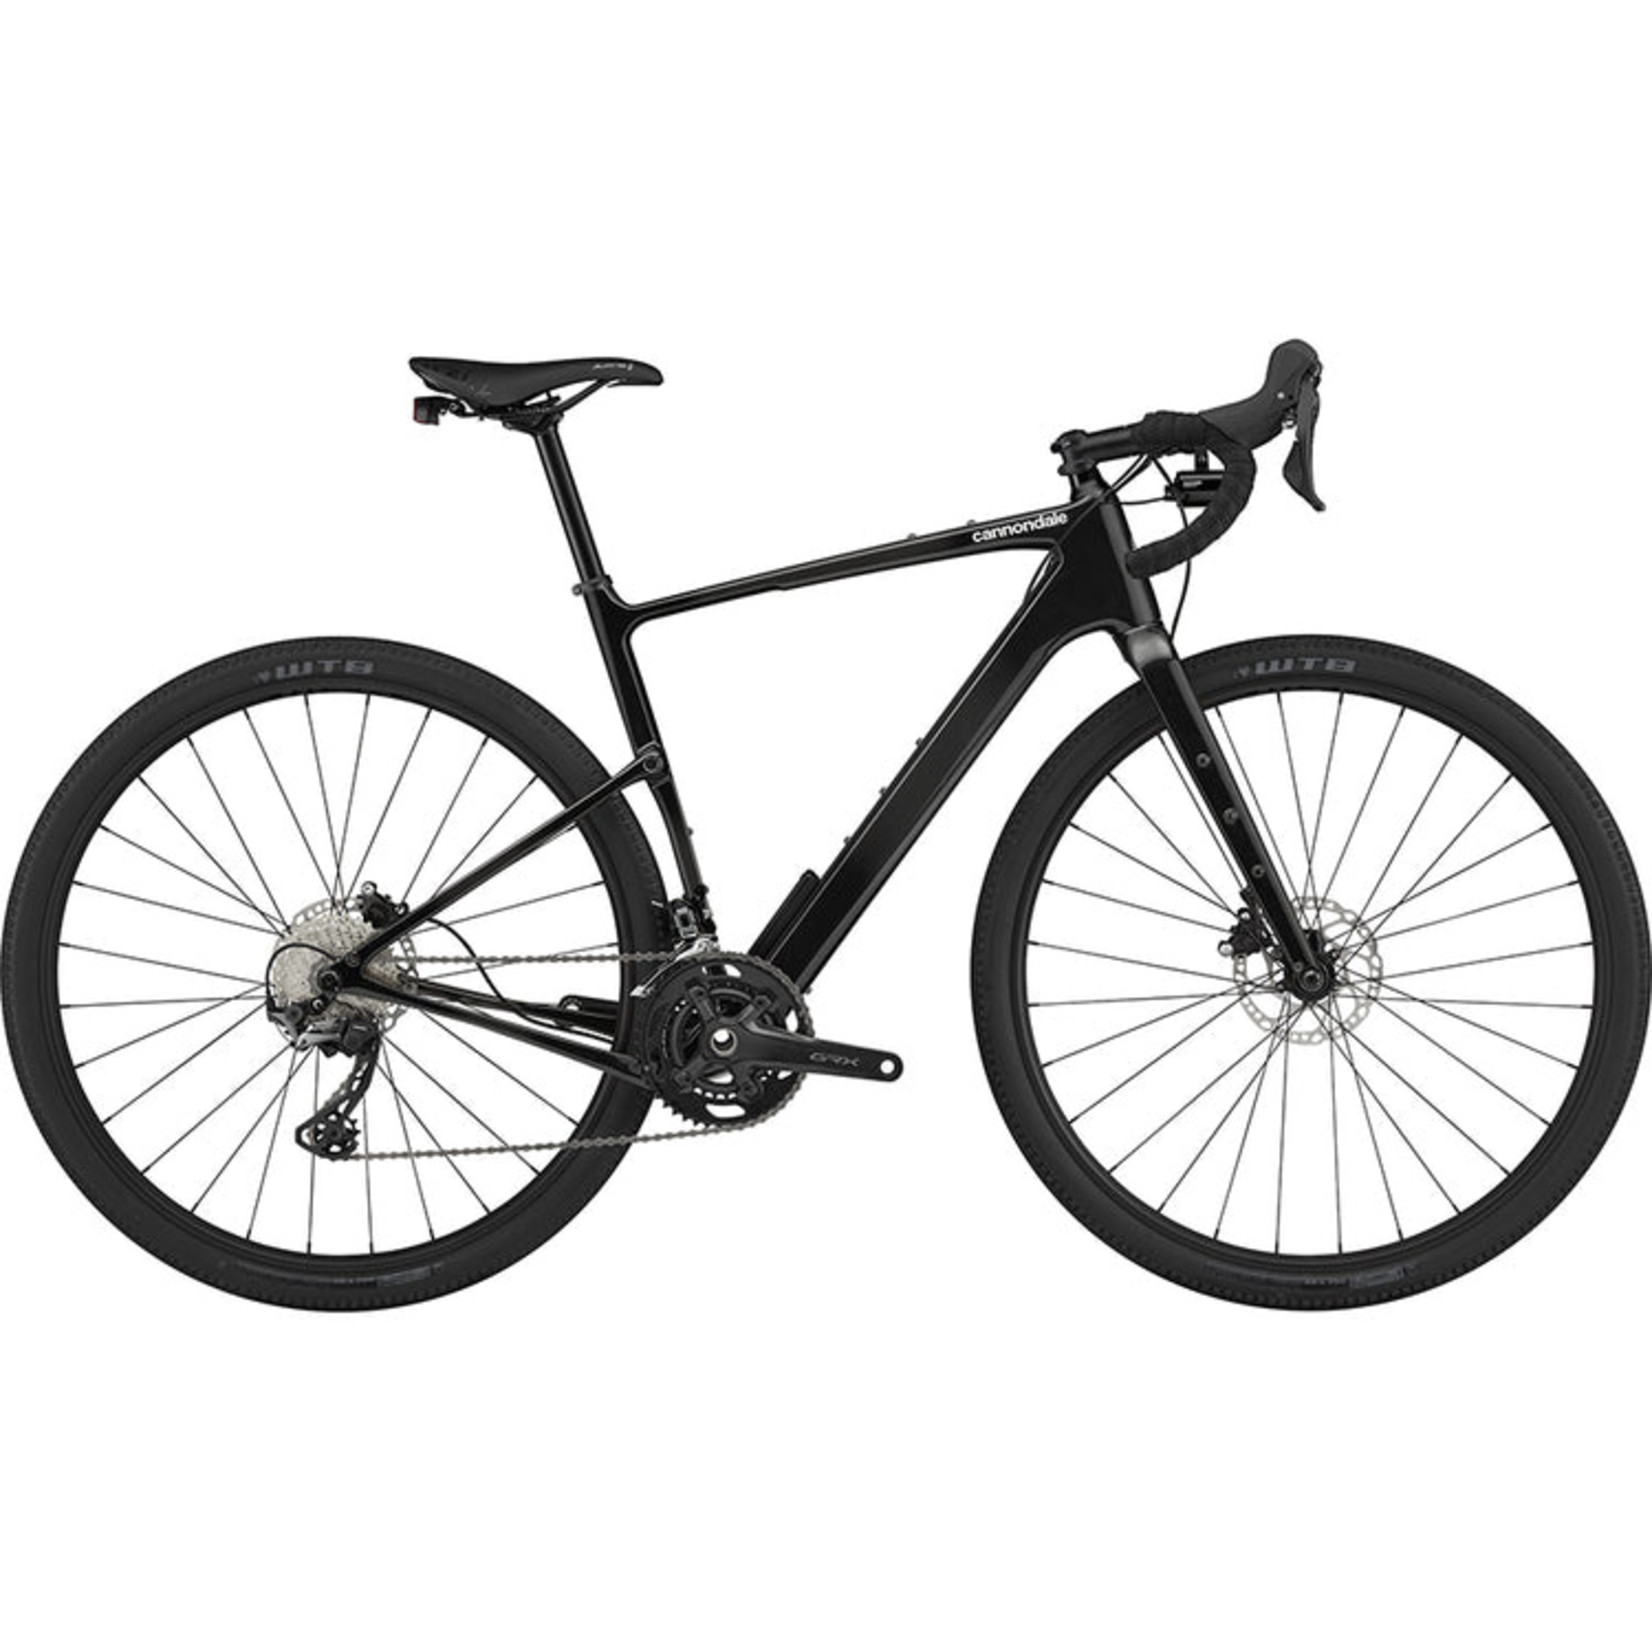 Cannondale Topstone Crb 3 L CRB MD